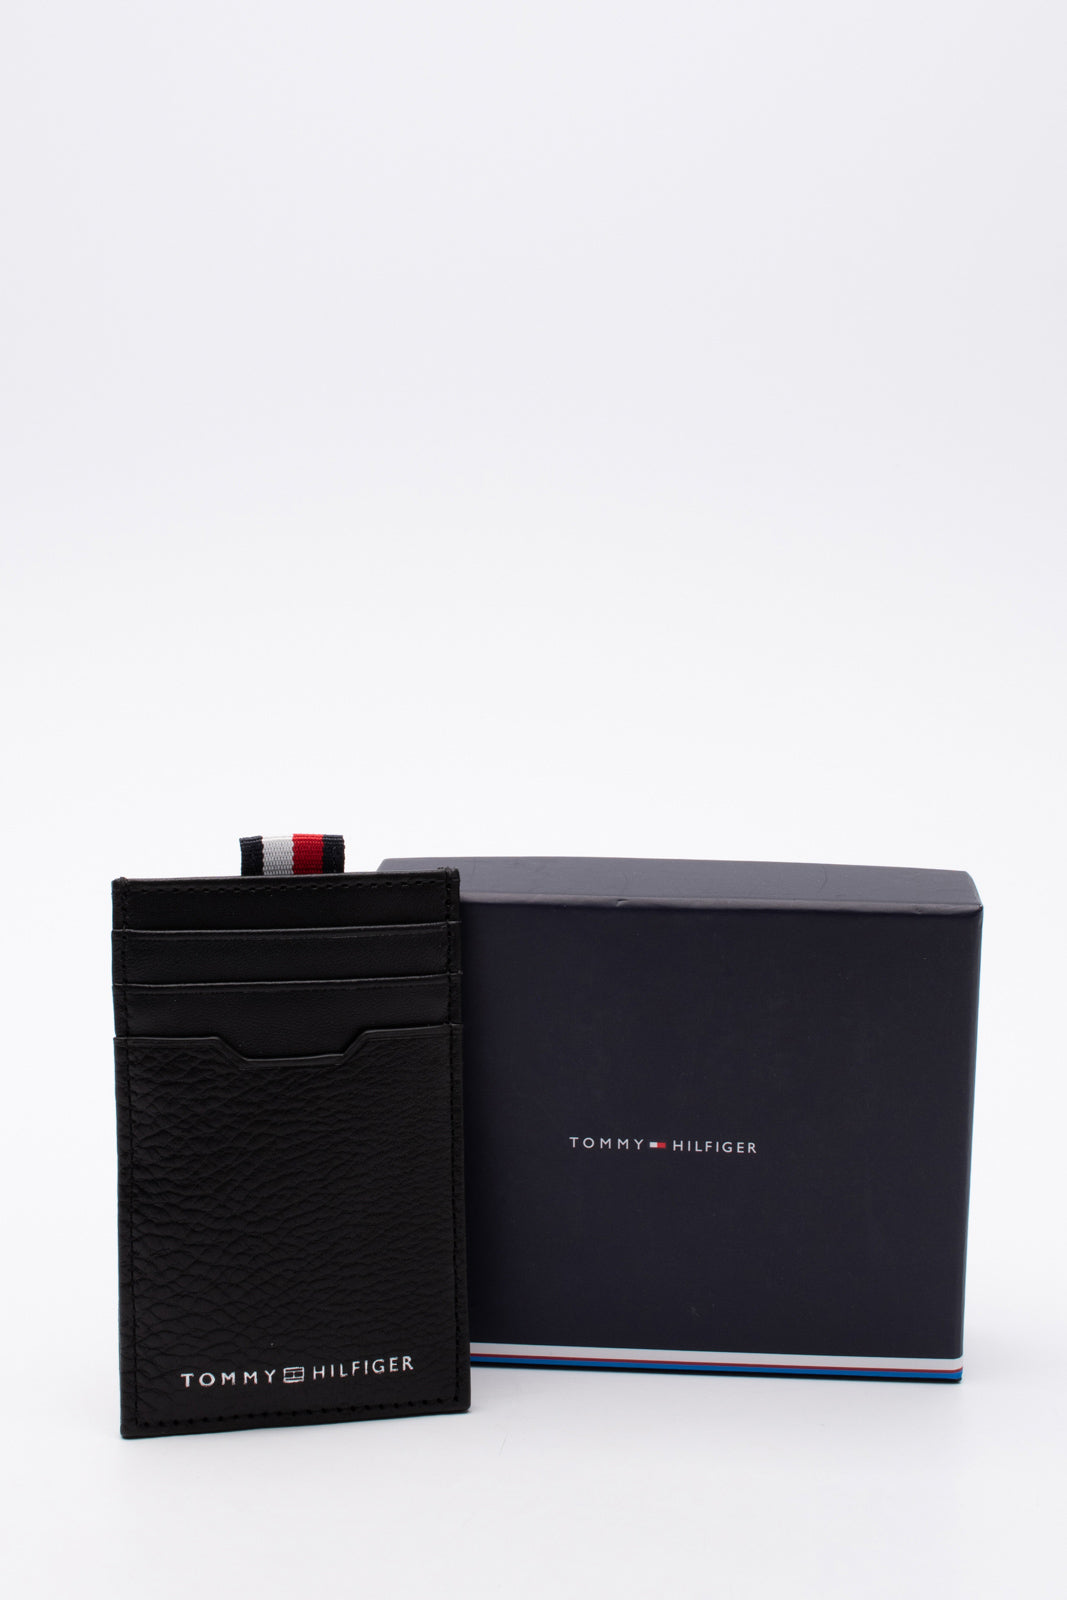 TOMMY HILFIGER DOWNTOWN Leather Vertical Card Holder Striped Trim RFID Blocking gallery main photo